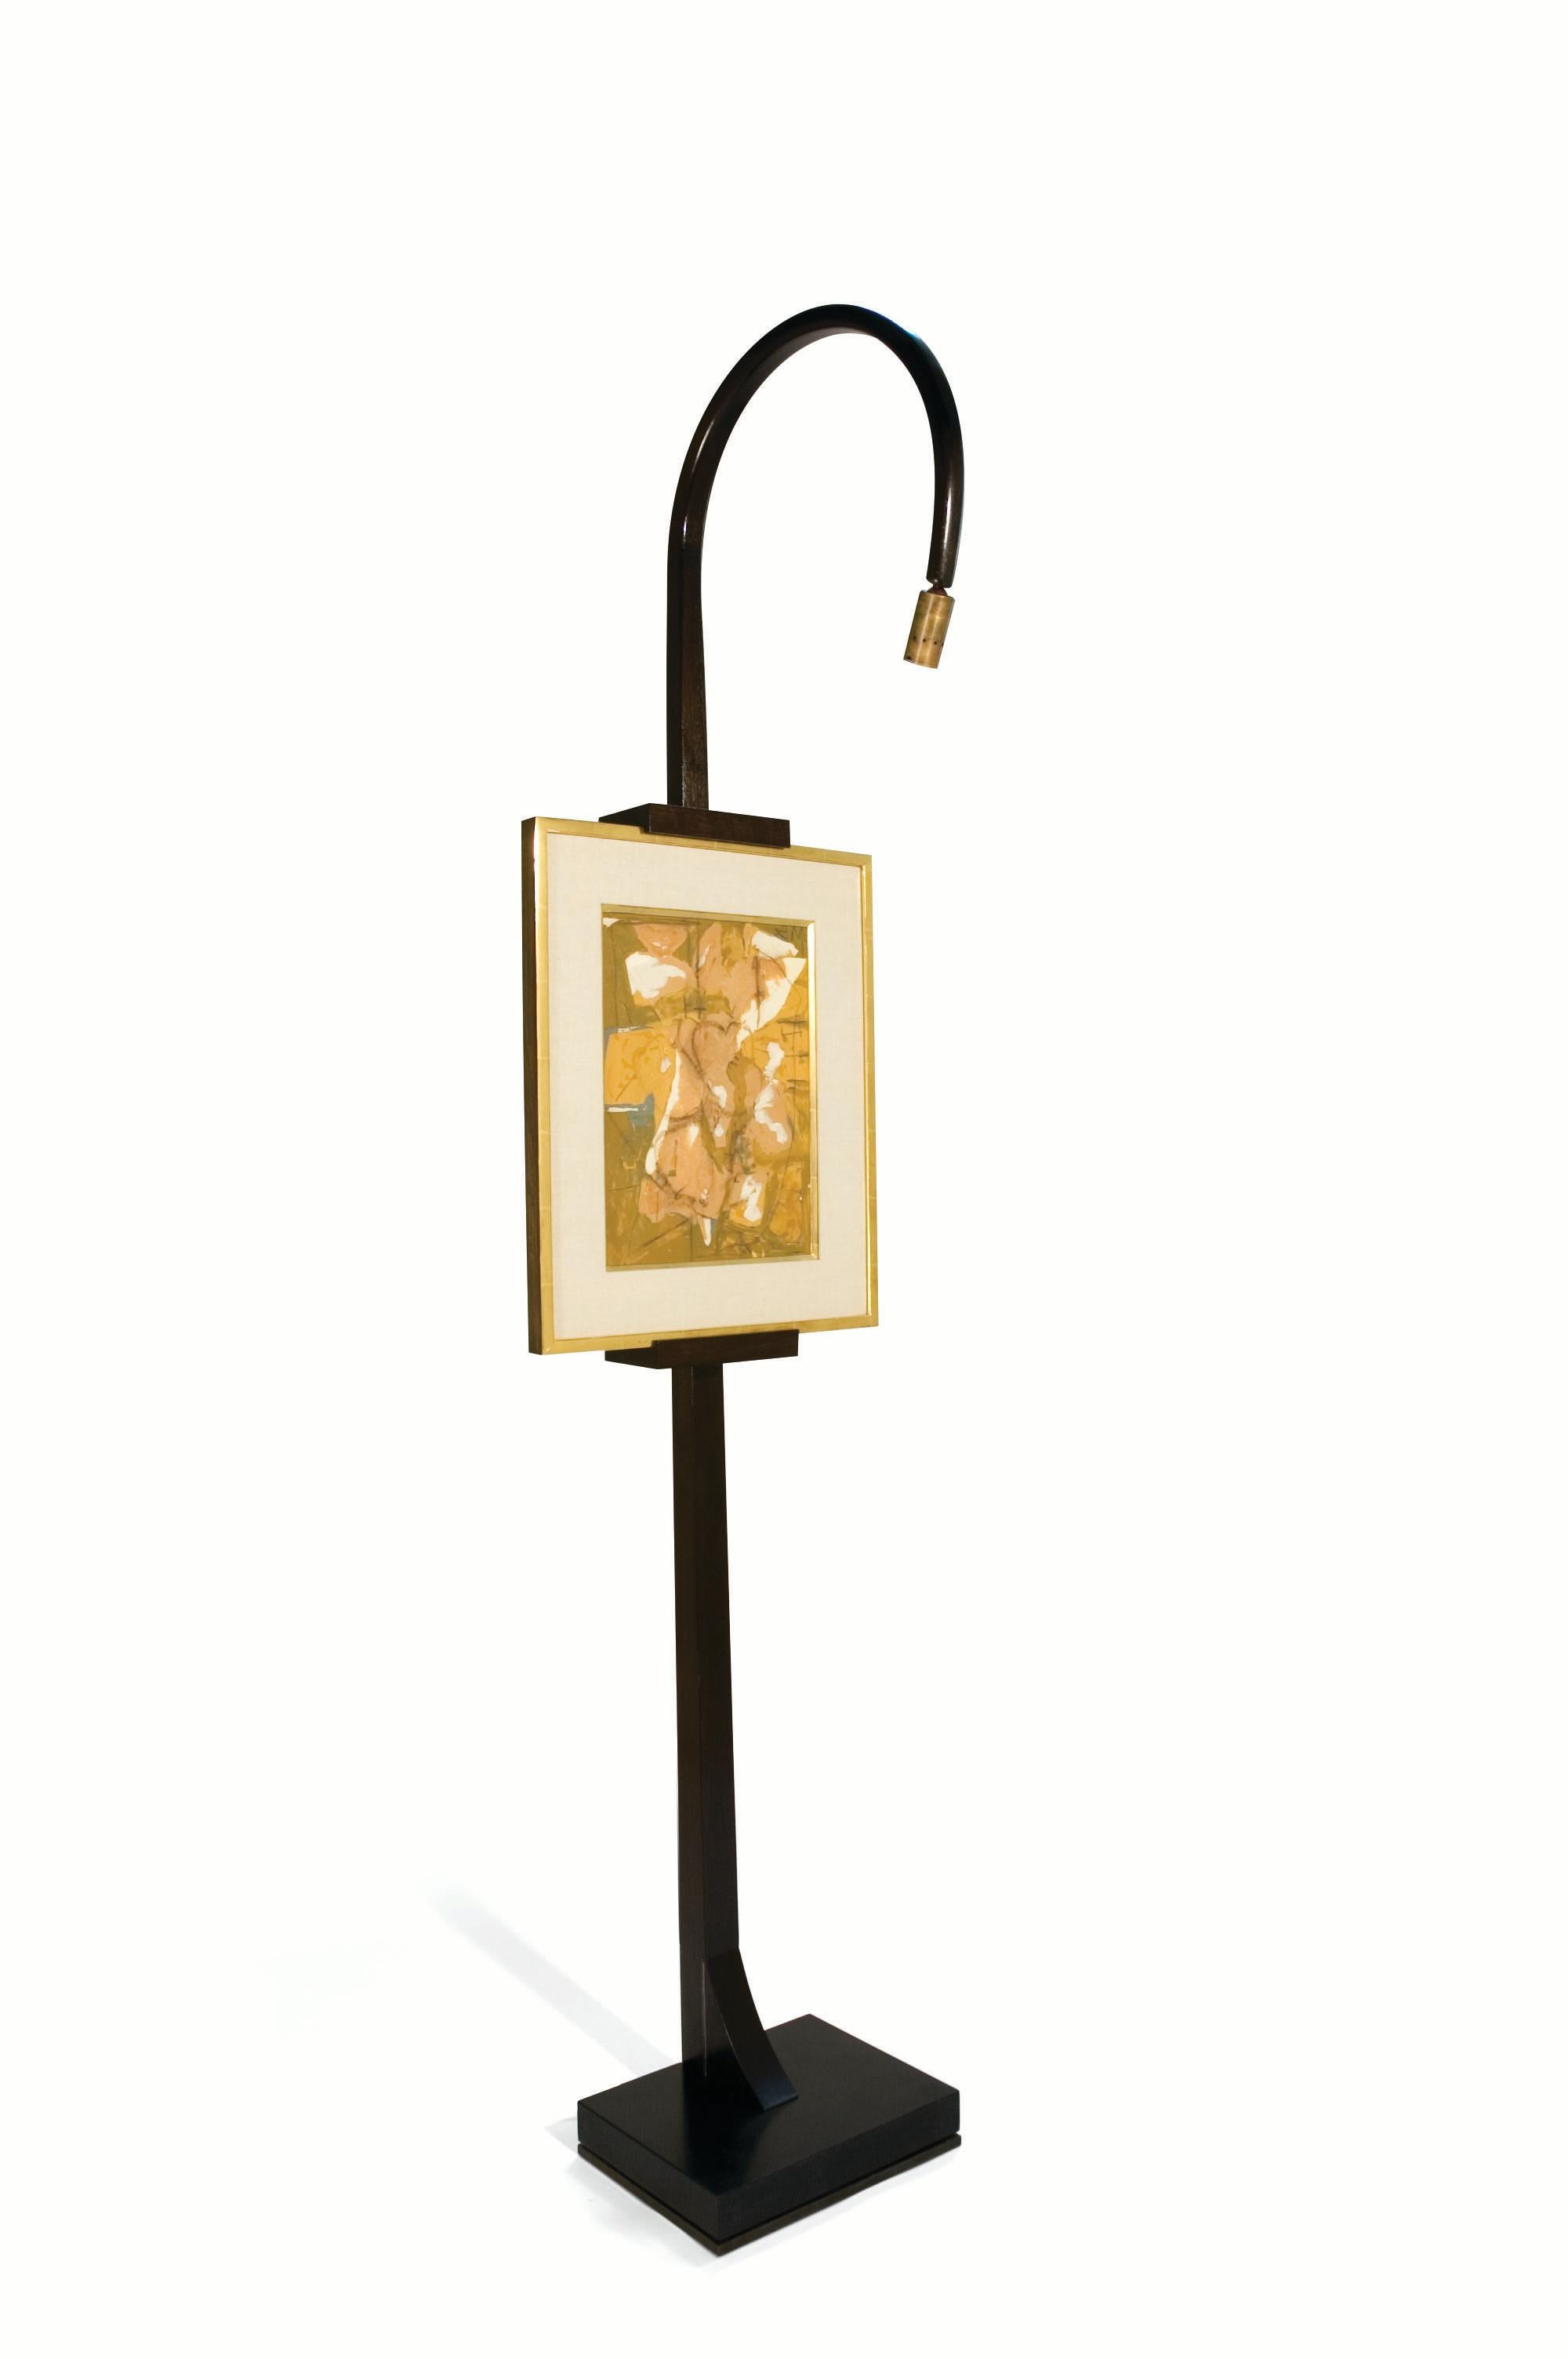 Television art stand and Fine Art easel display stand.
Shown in exotic wenge wood with absolute black granite base
Customizeable with numerous stones and exotic wood and a choice of bronze, patinated steel or stainless steel. Each piece signed by